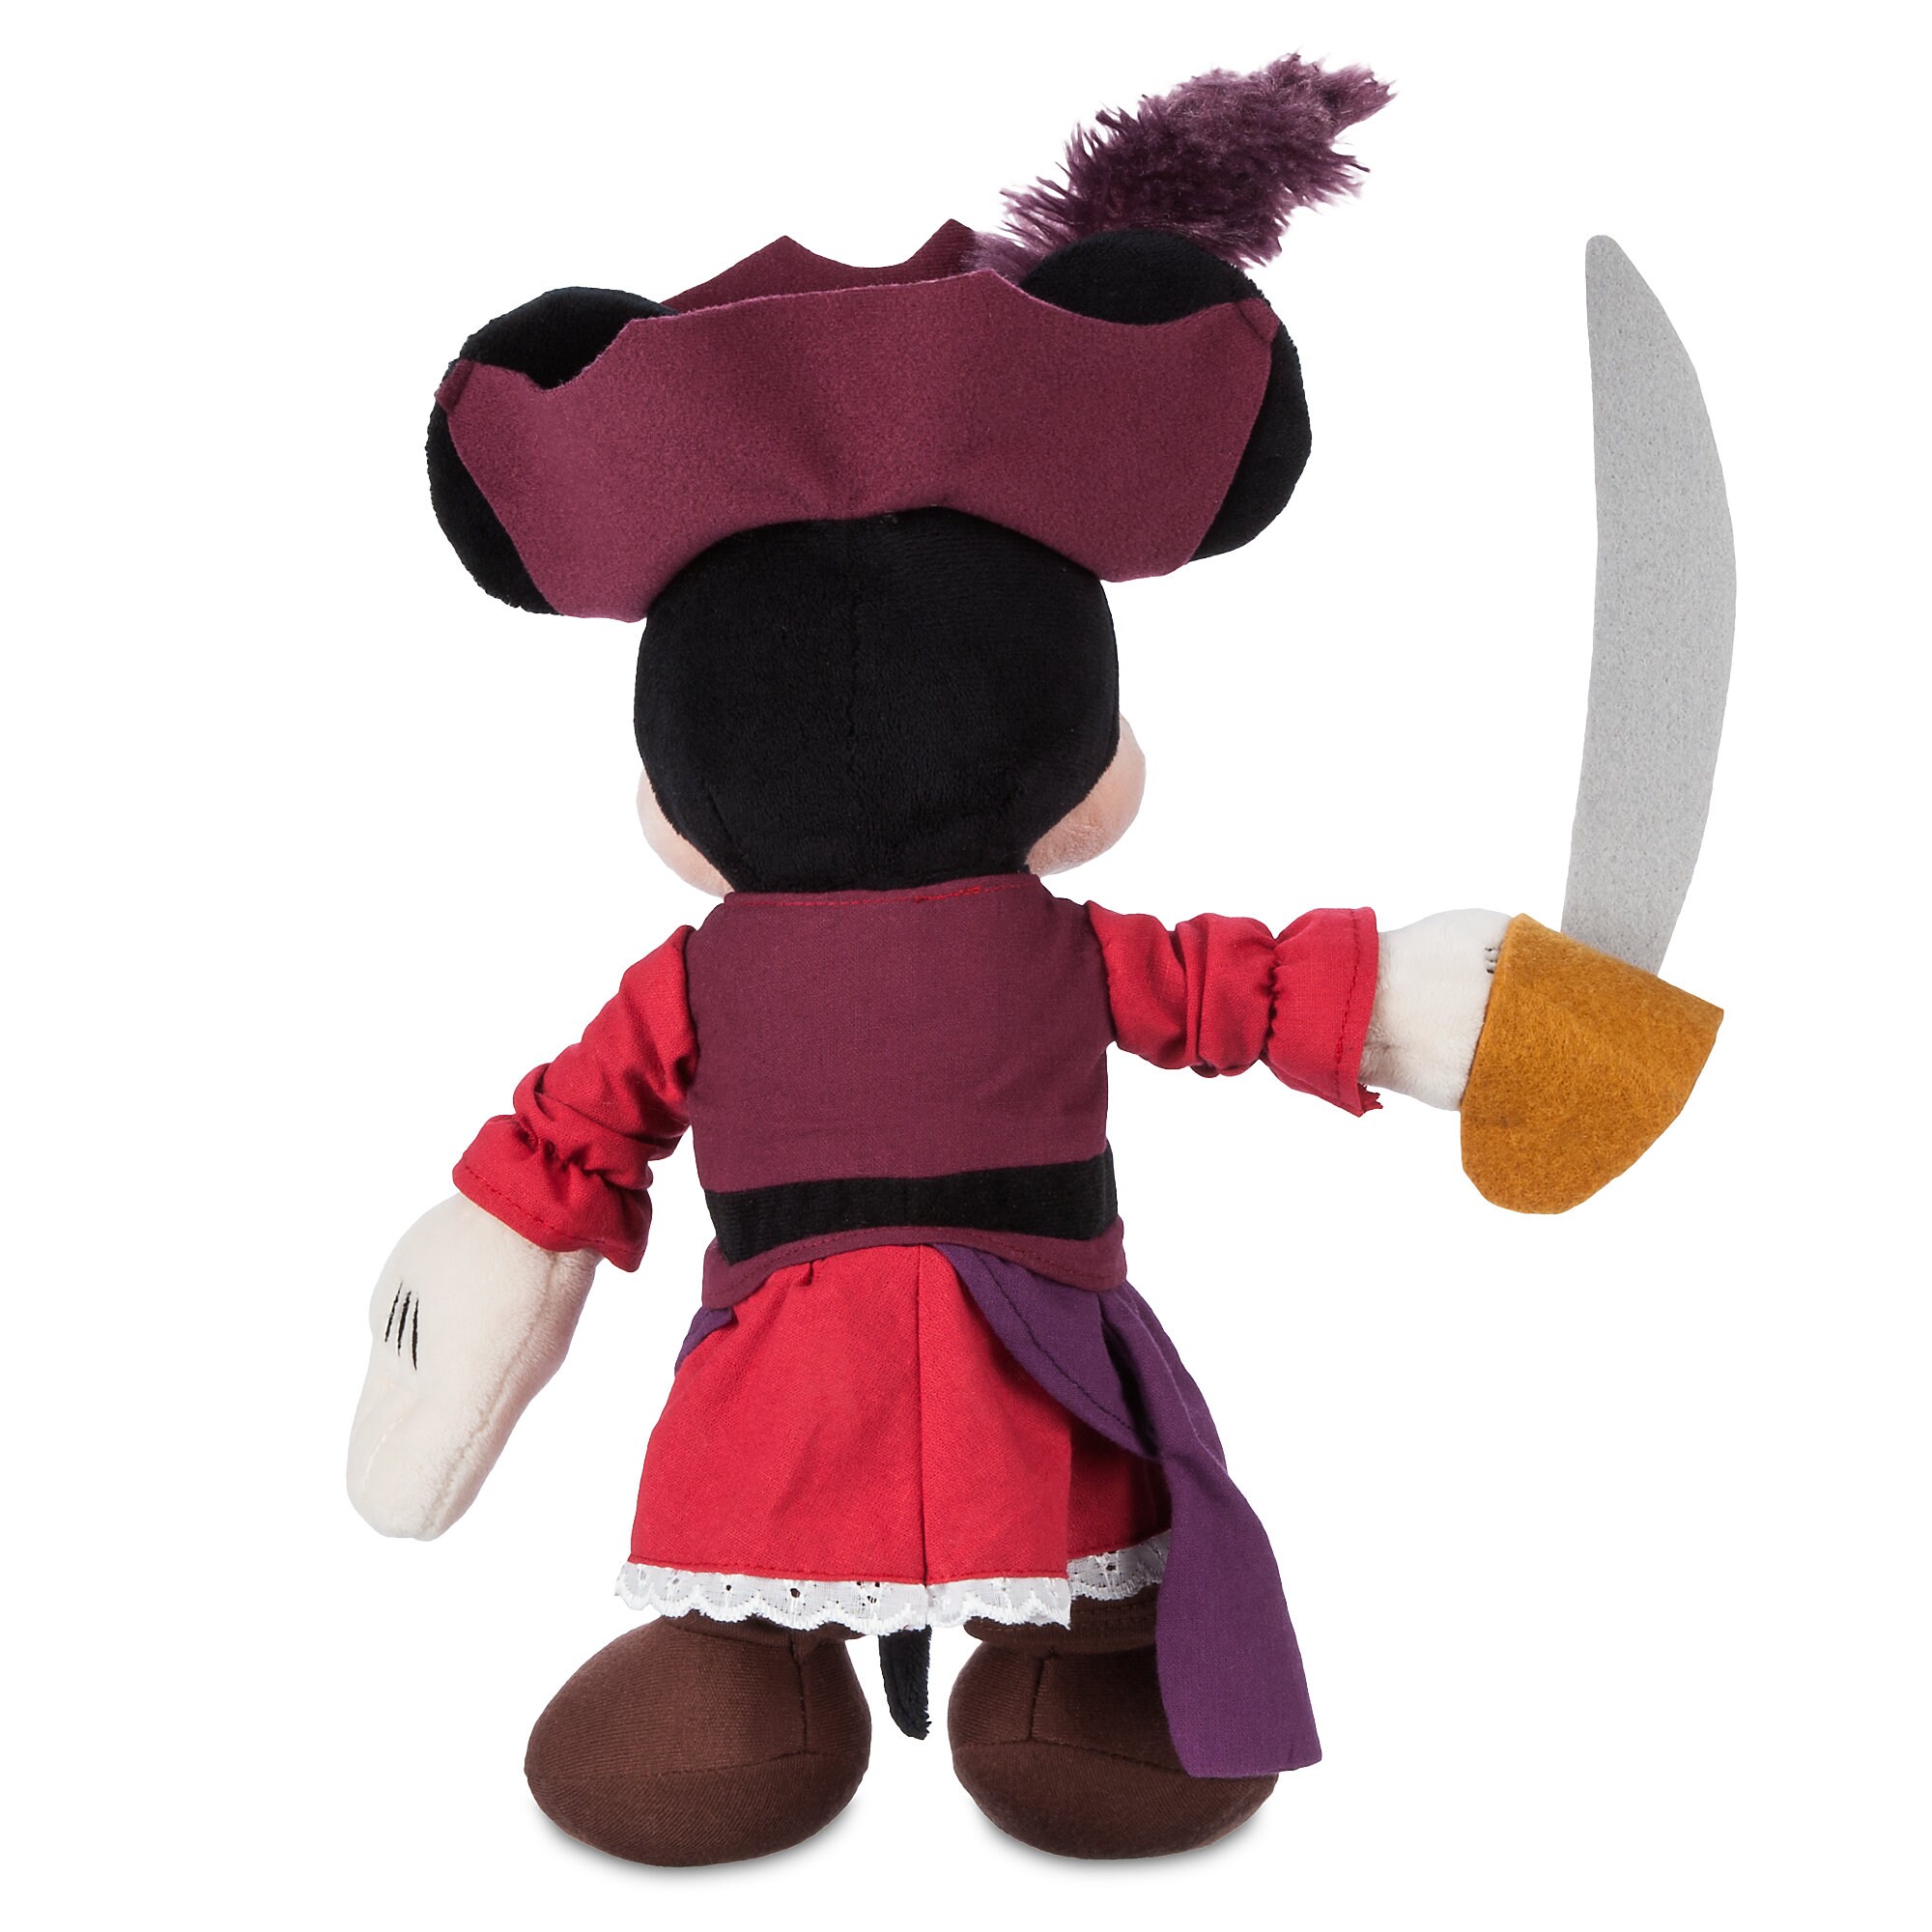 Minnie Mouse Plush - Pirates of the Caribbean - Small - 12''